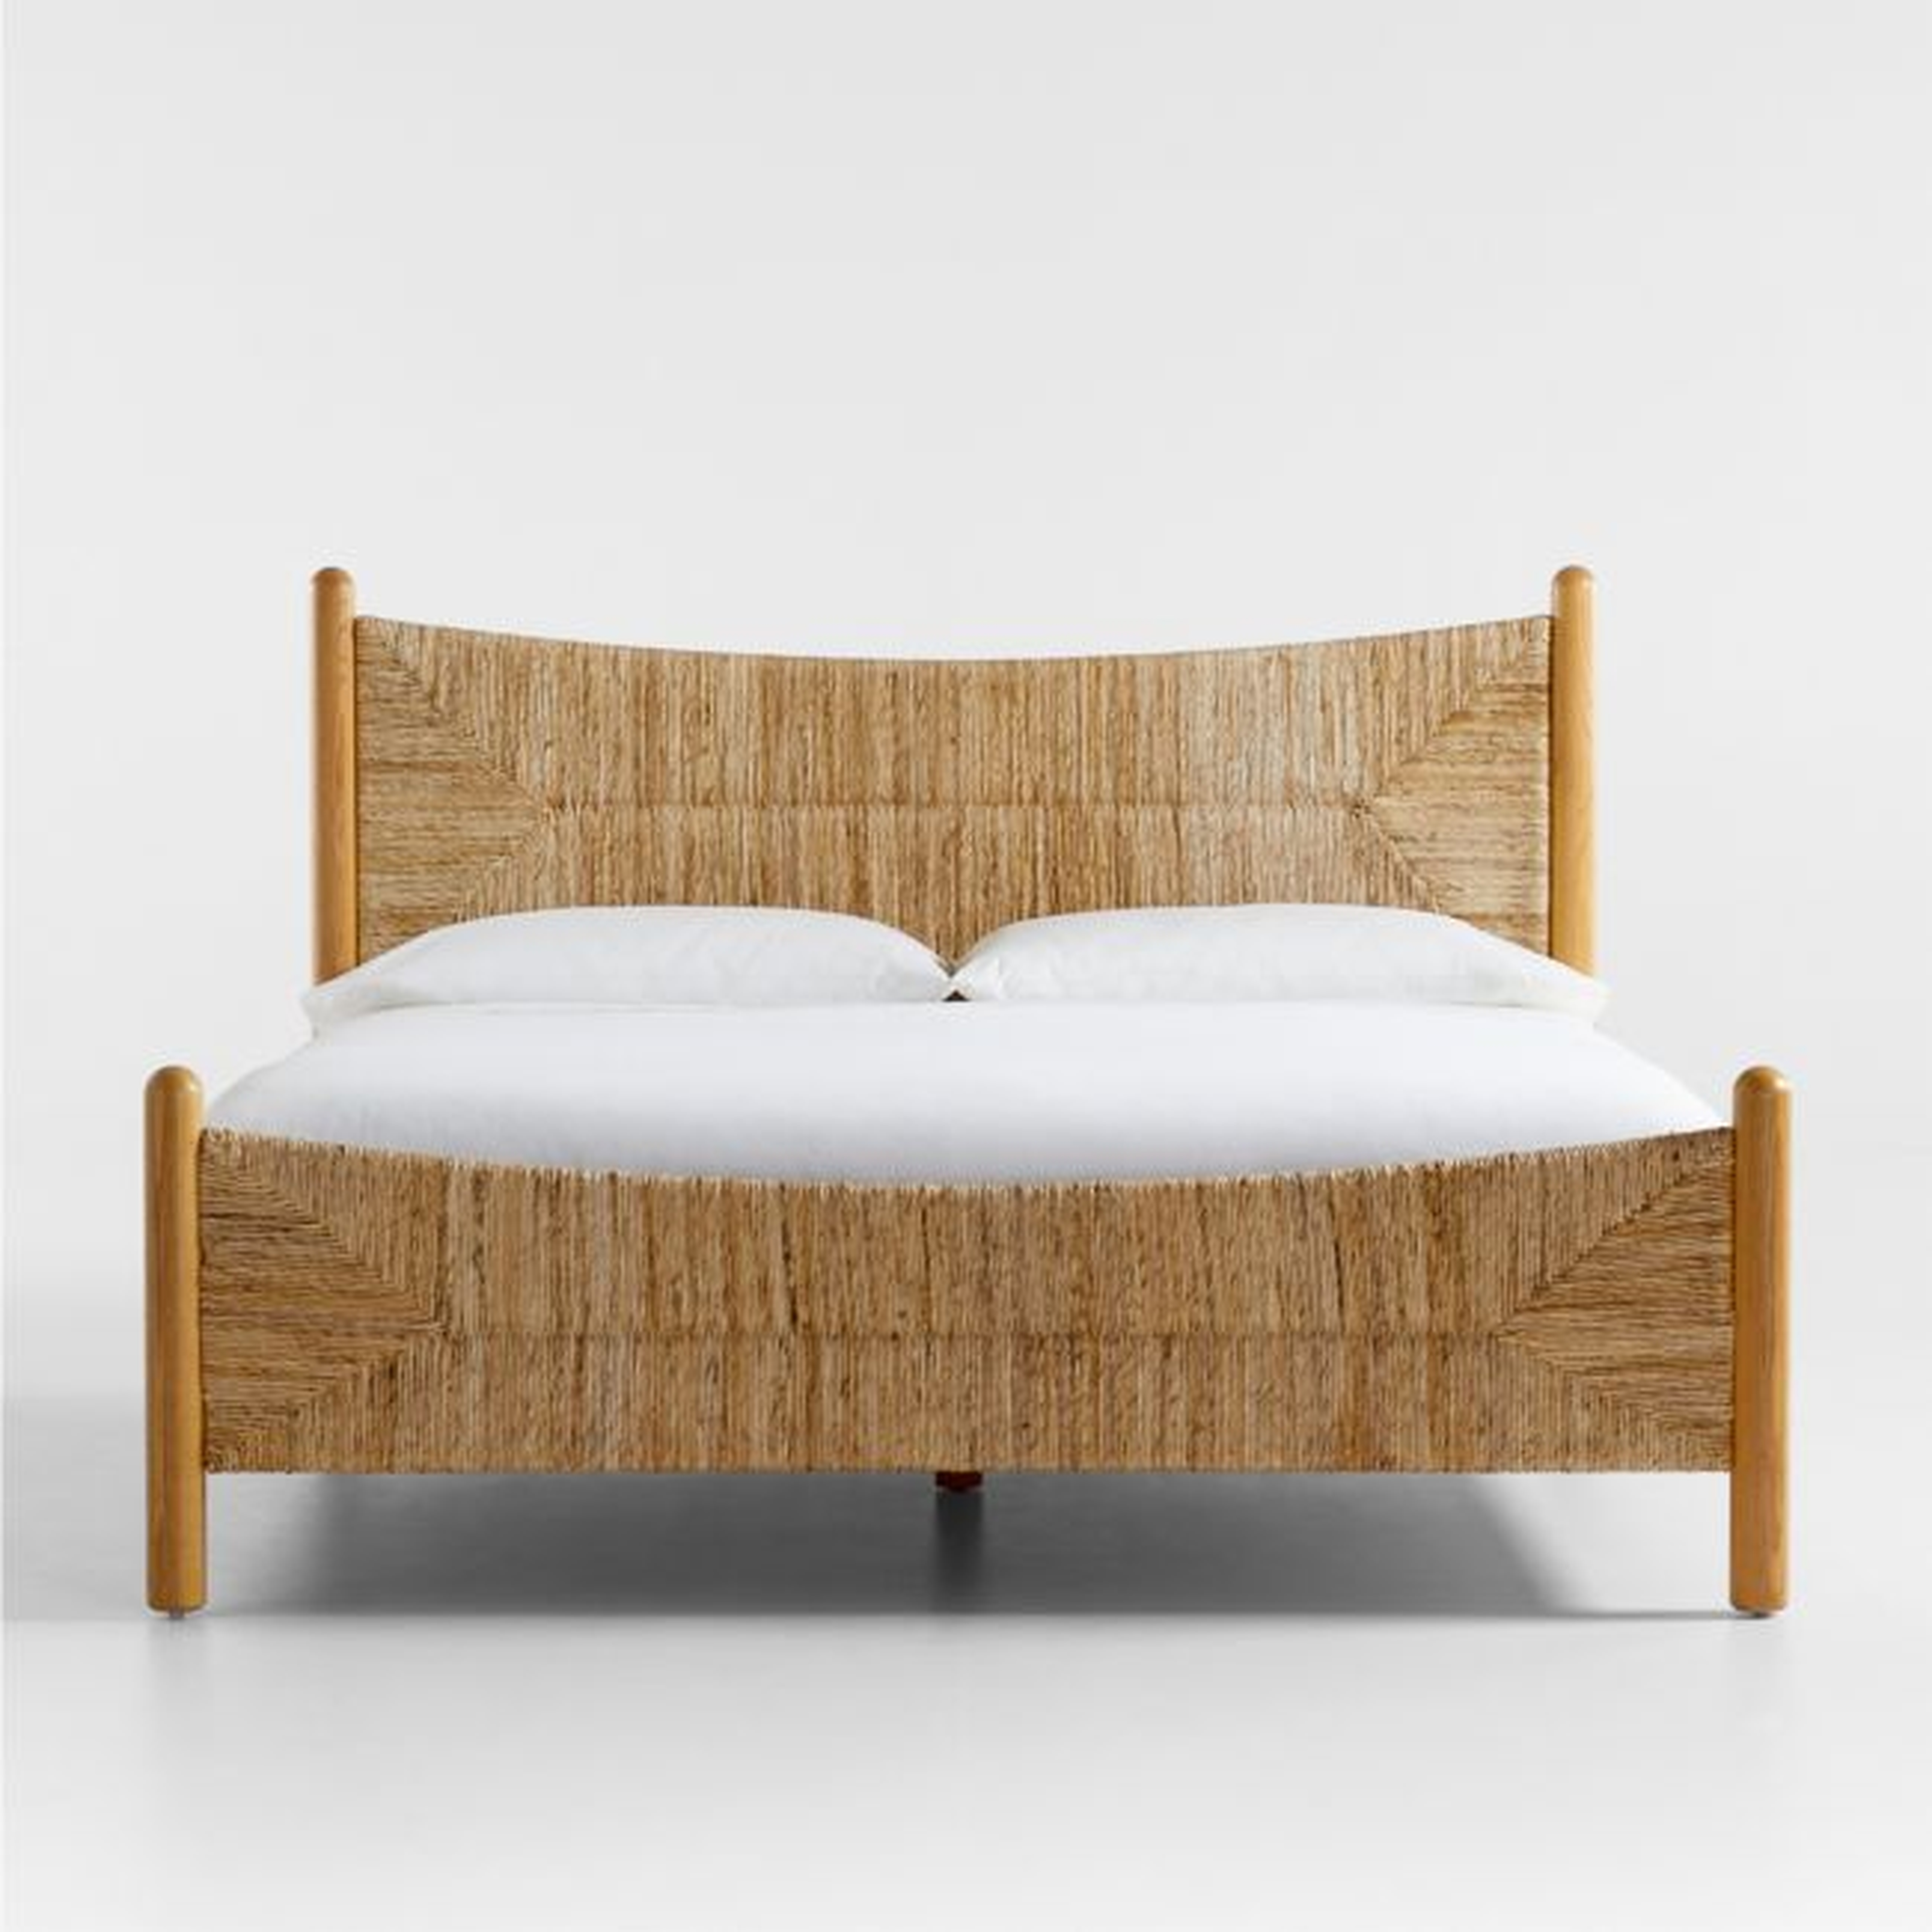 Rambler King Rush Woven Bed - Crate and Barrel